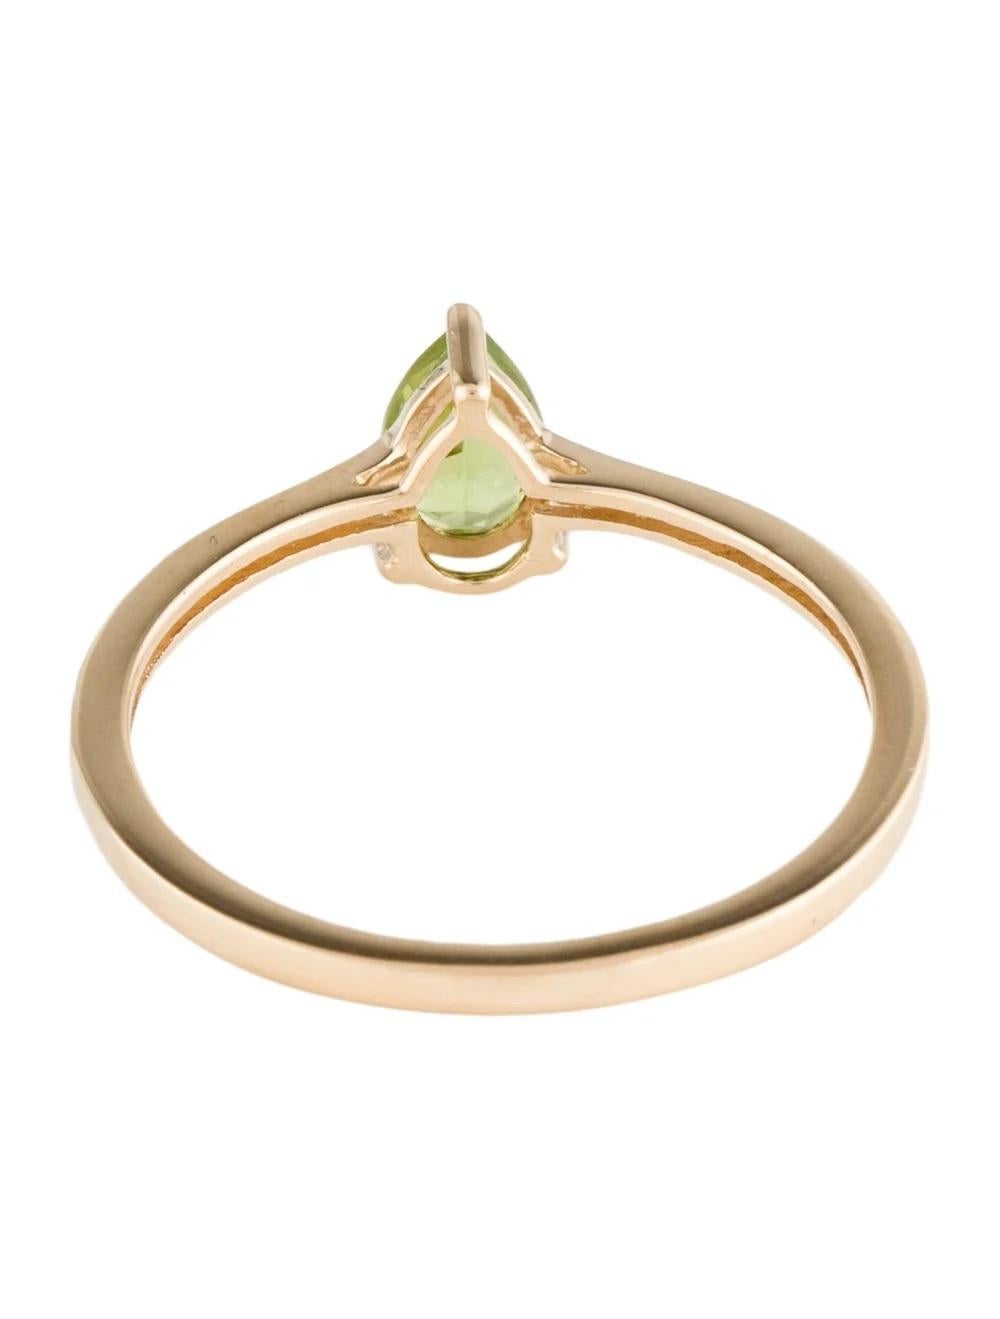 14K Peridot Cocktail Ring, Size 6.75 - Green Gemstone Statement Piece, Elegant In New Condition For Sale In Holtsville, NY